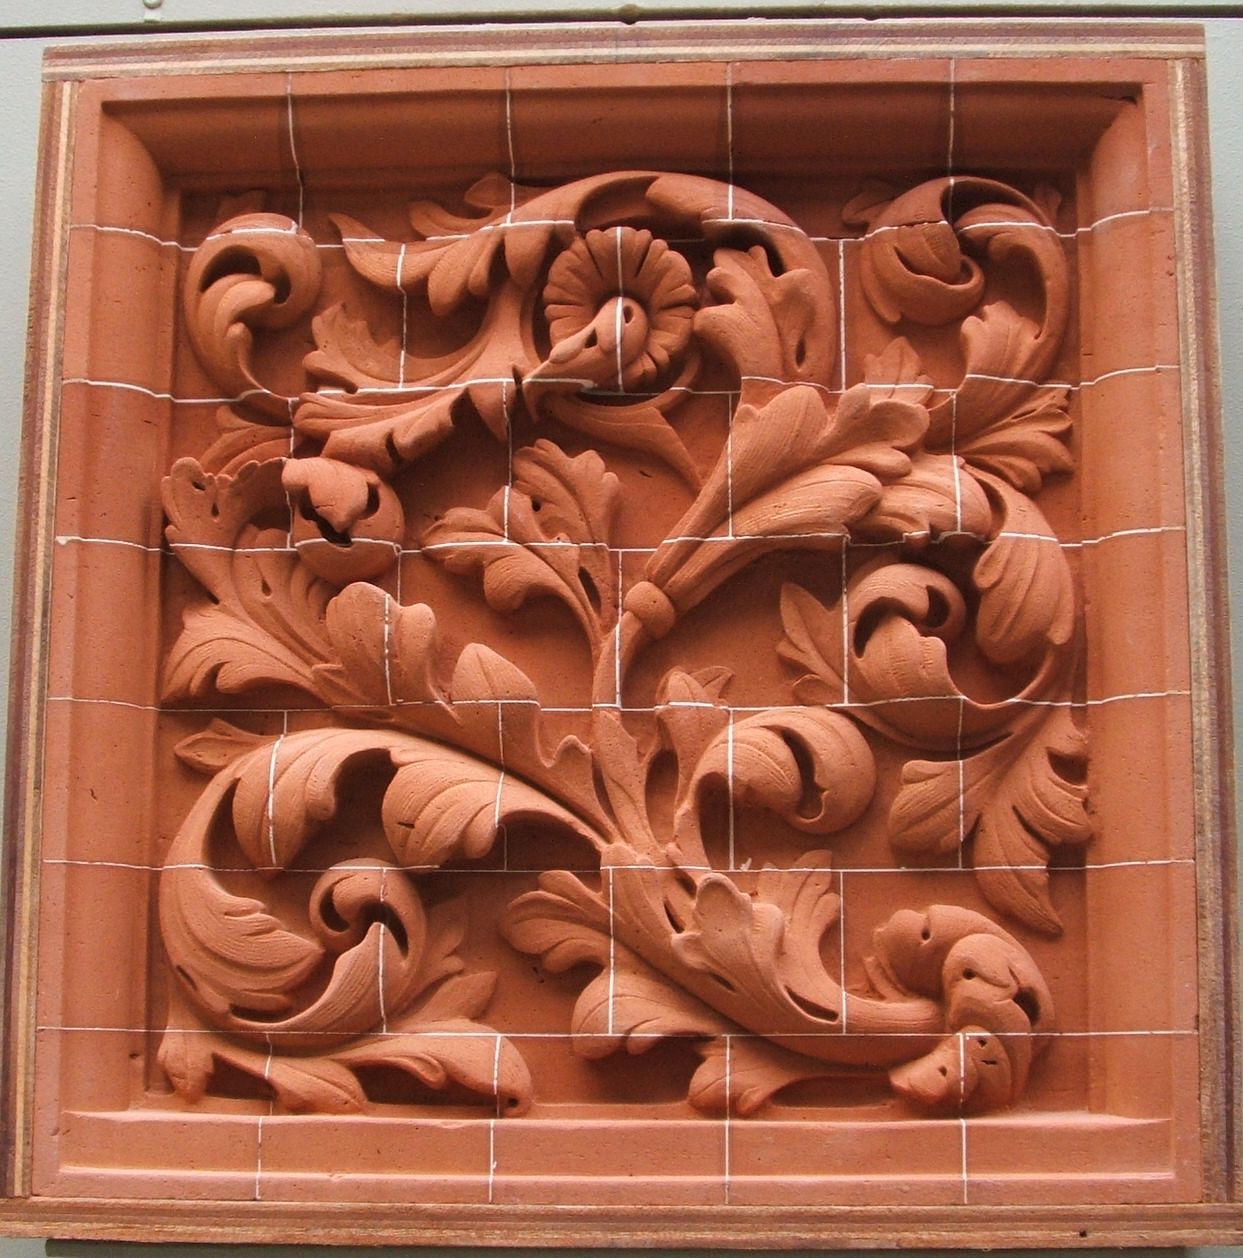 Relief Carving Gallery